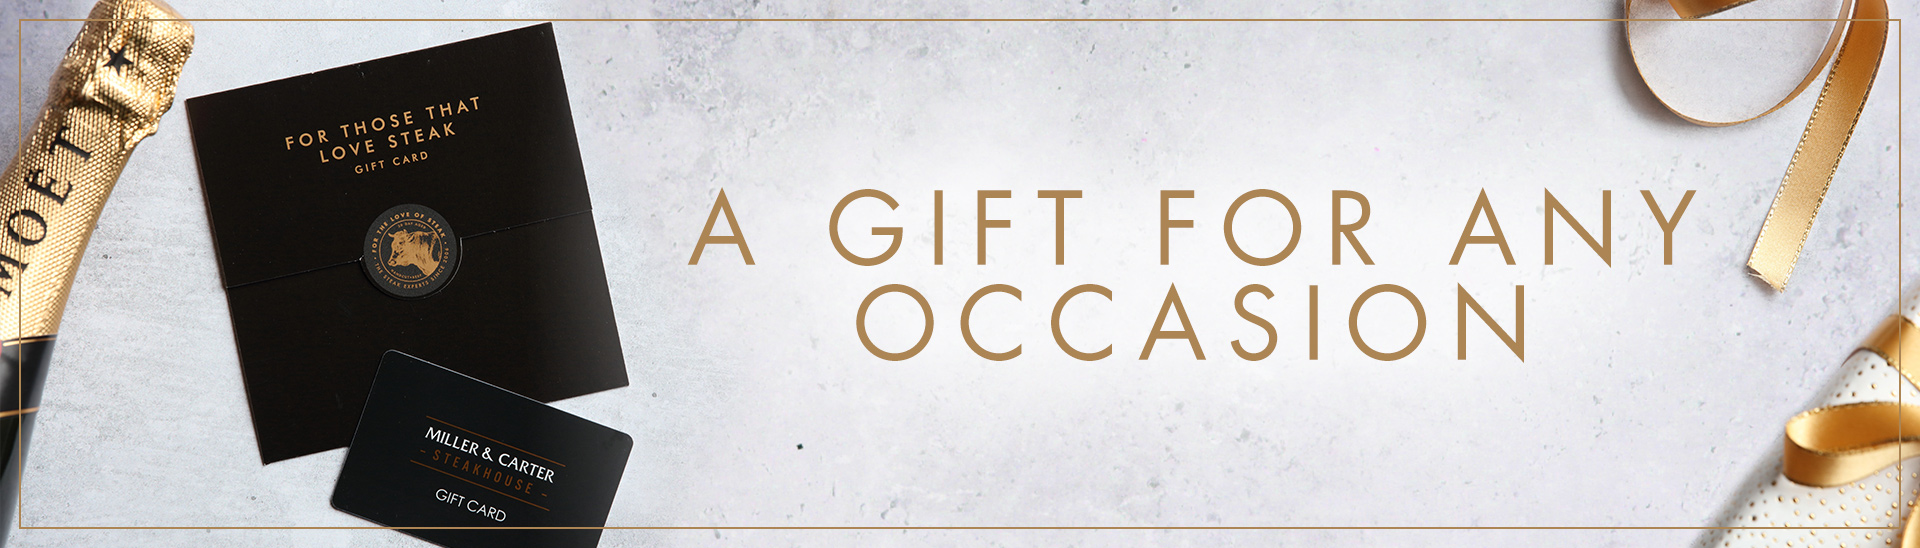 The Dining Out Gift Card | Giftcard.co.uk